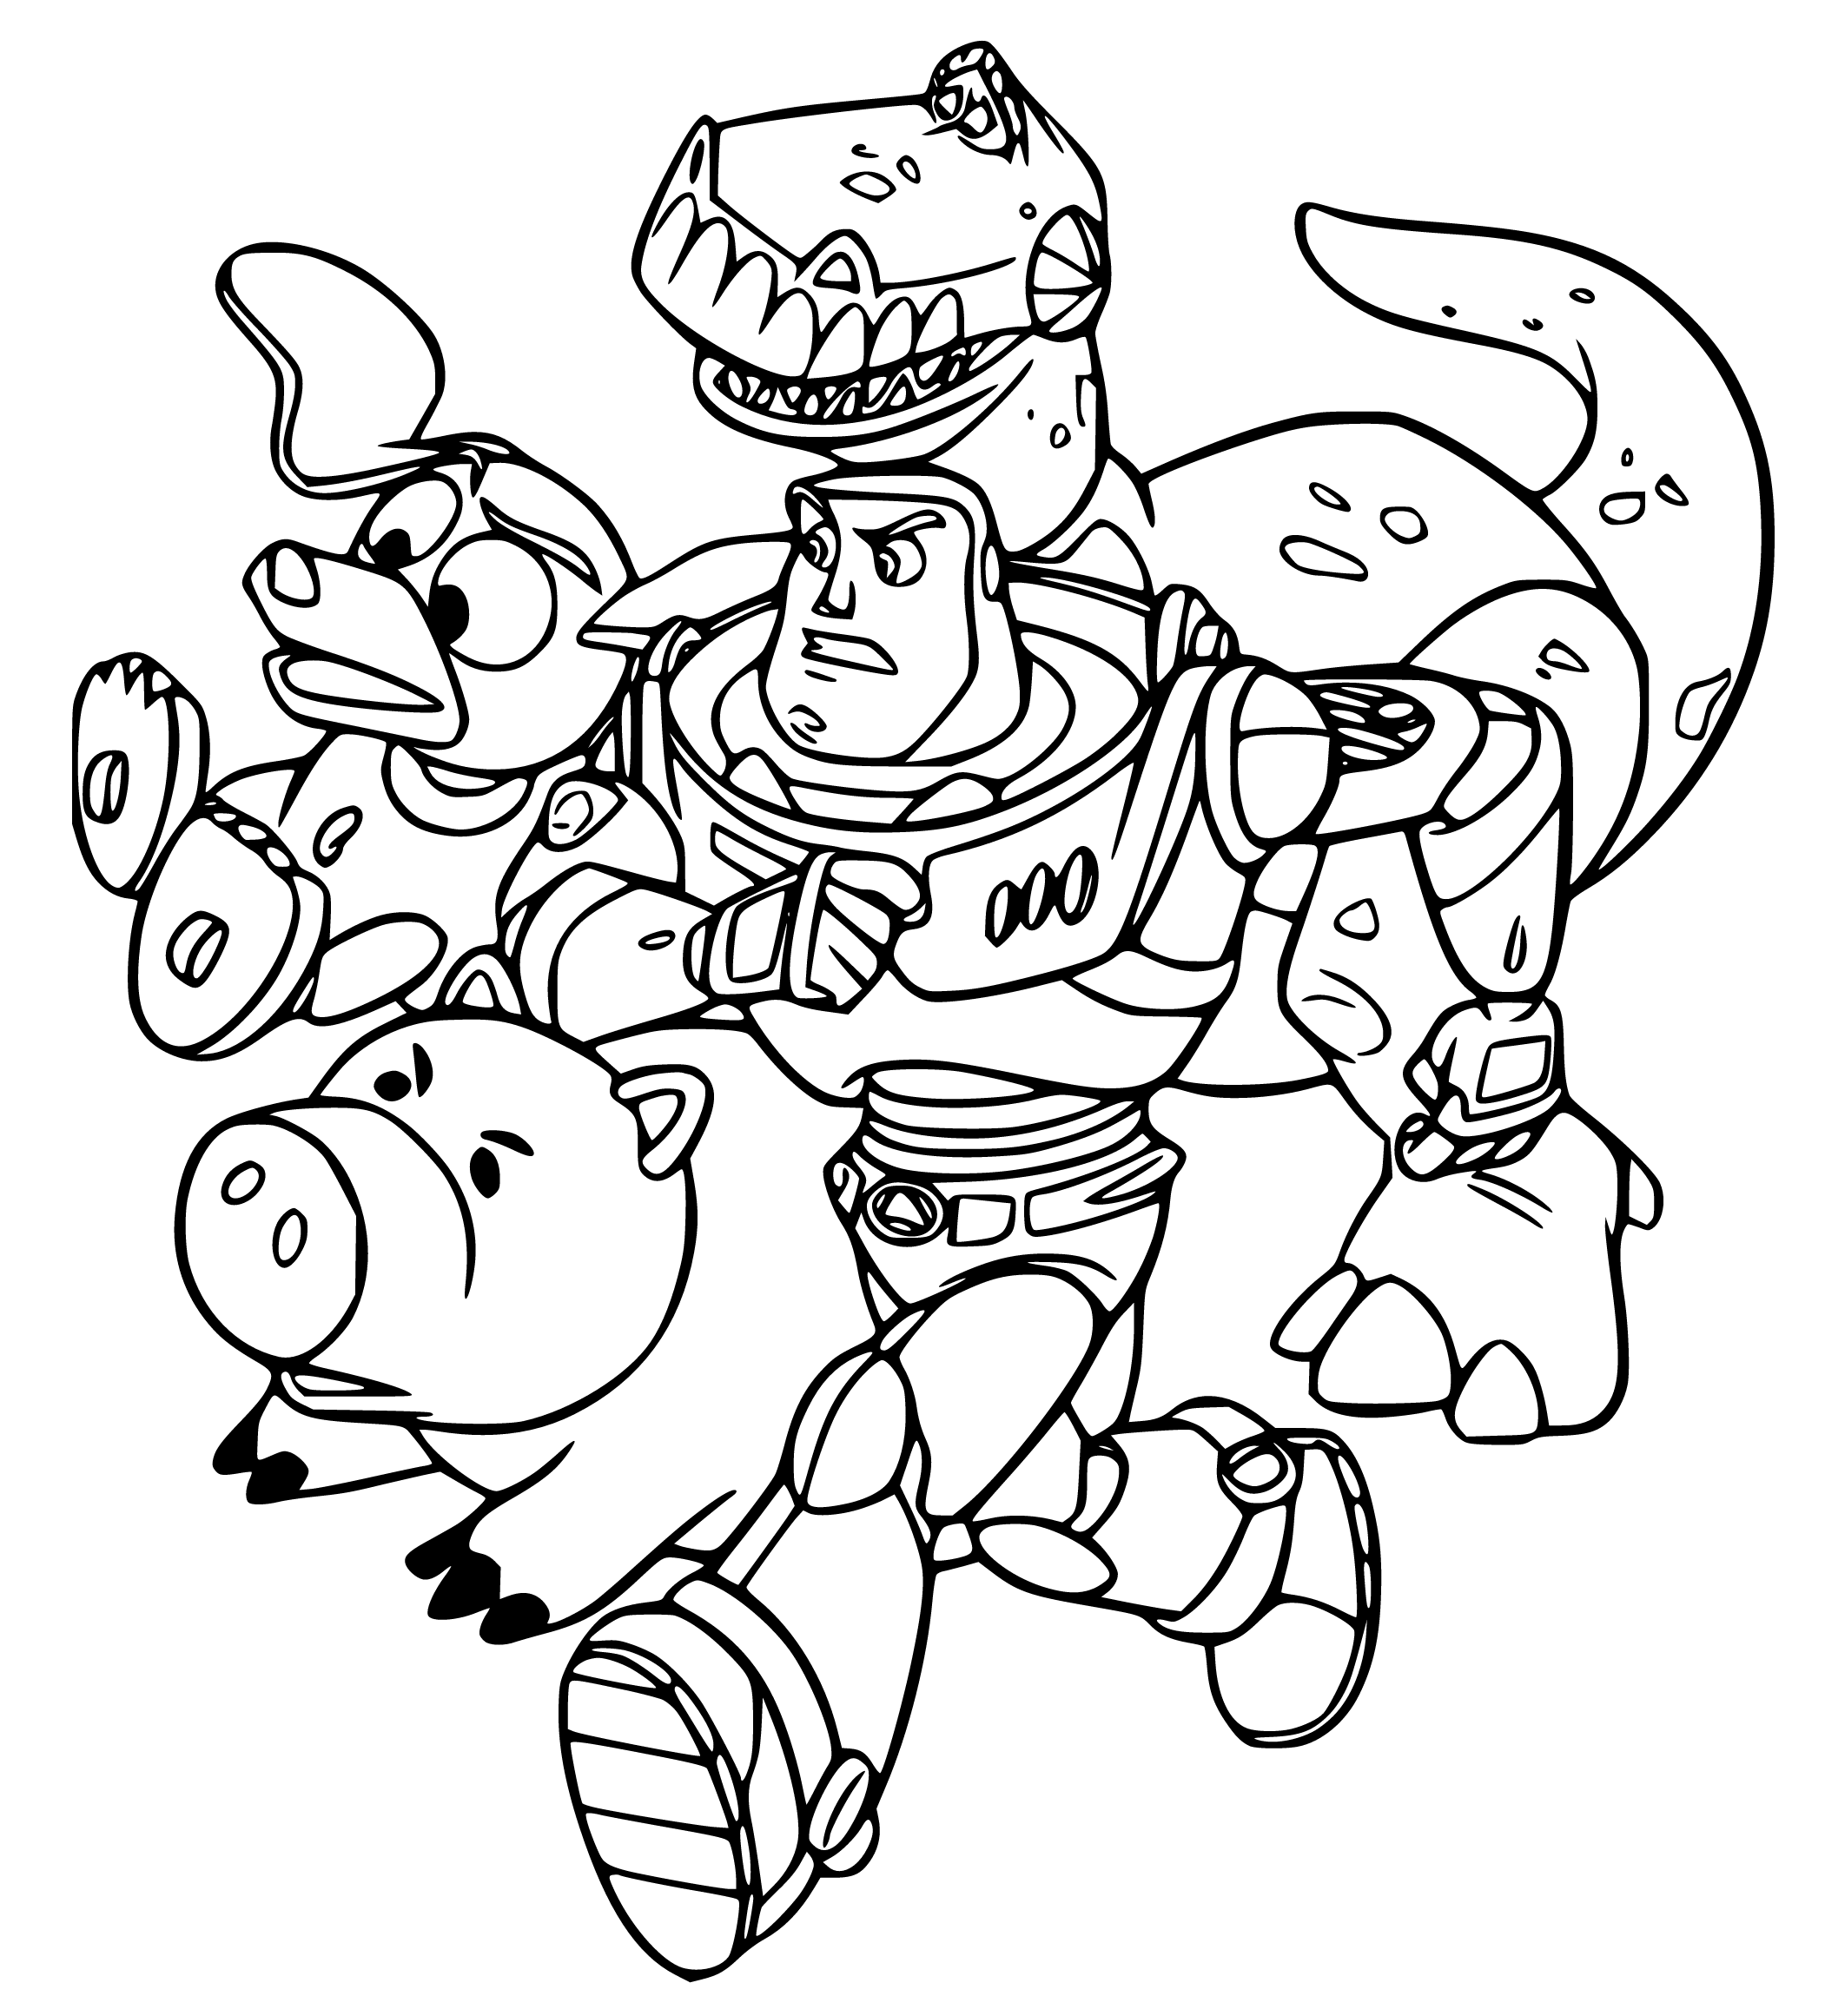 TOY STORY: Buzz,Slinky,Rex,Hamm Coloring Pages - SheetalColor.com